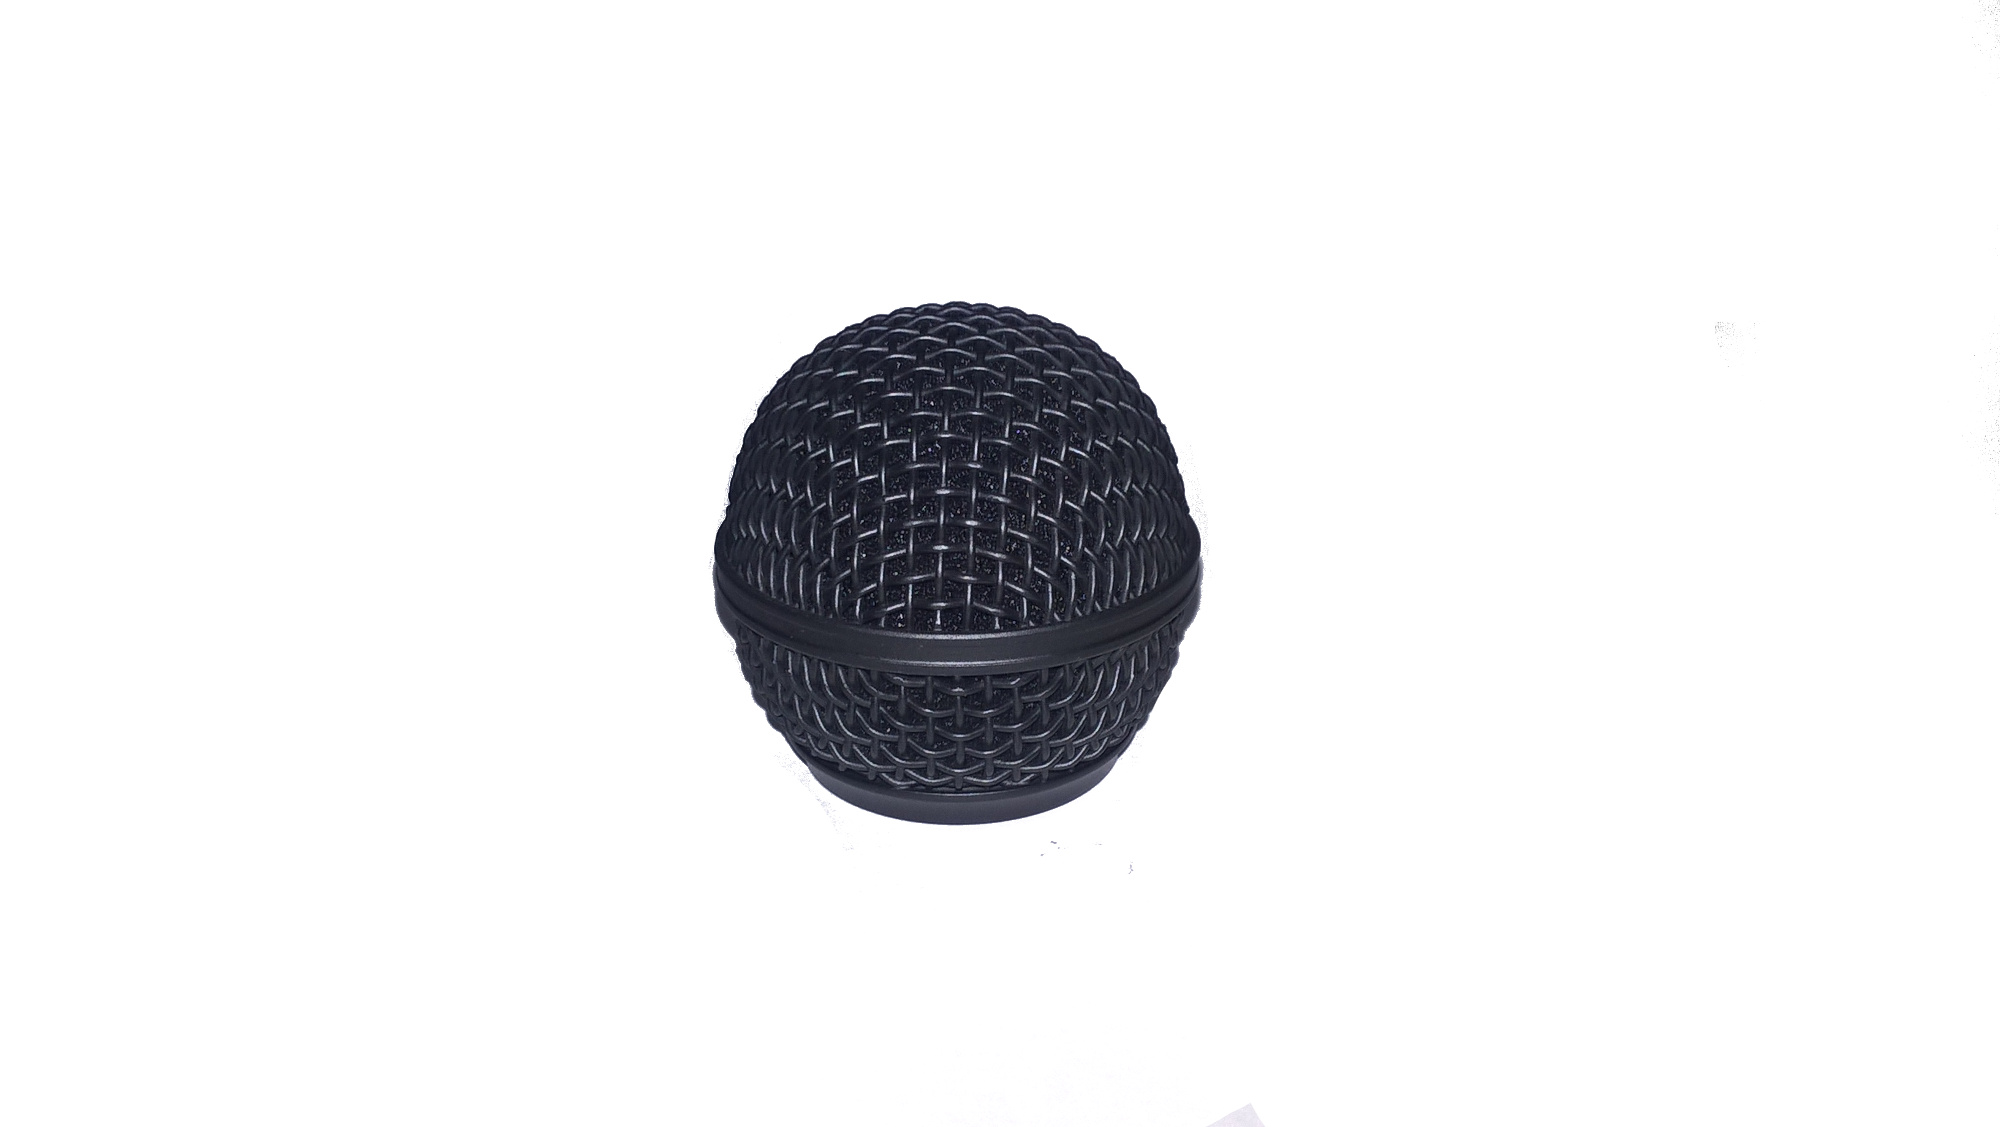 Performance Plus MB58-B Mesh Grill Replacement for Shure SM58 Black Color Ball